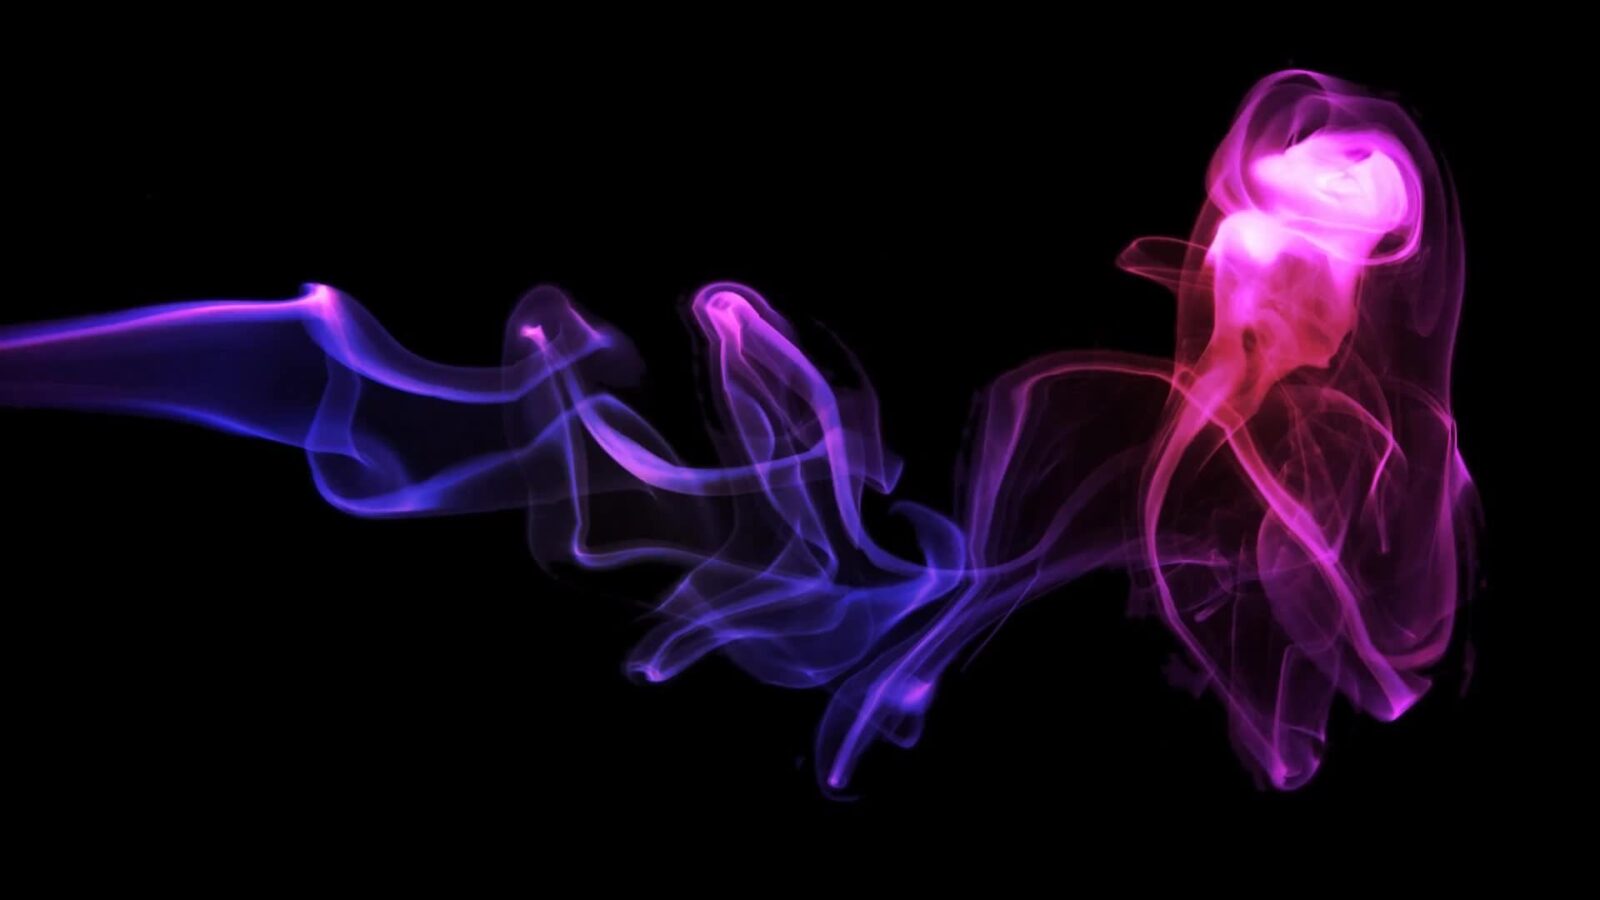 LiveWallpapers4Free.com | Simple Tiny Smoke Abstract - Free Live Wallpaper